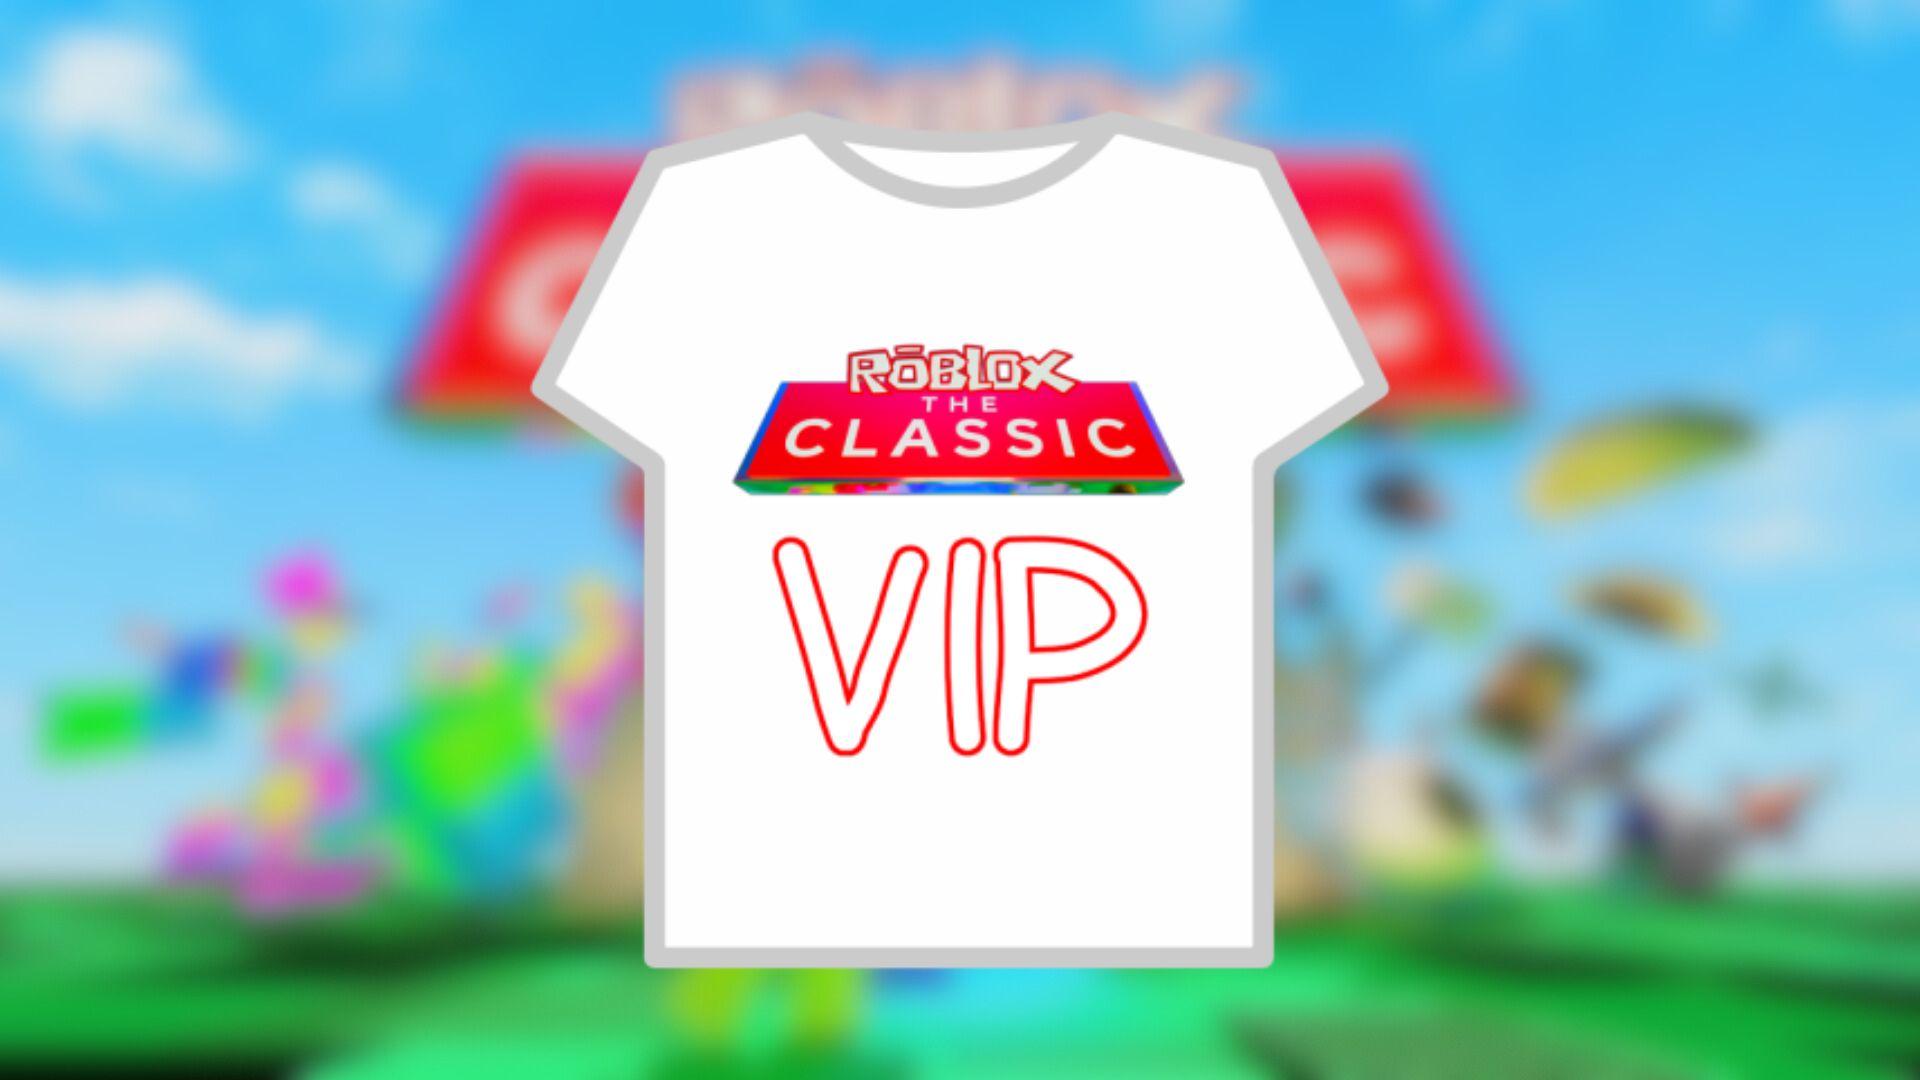 cover art featuring The Classic VIP shirt from Roblox.